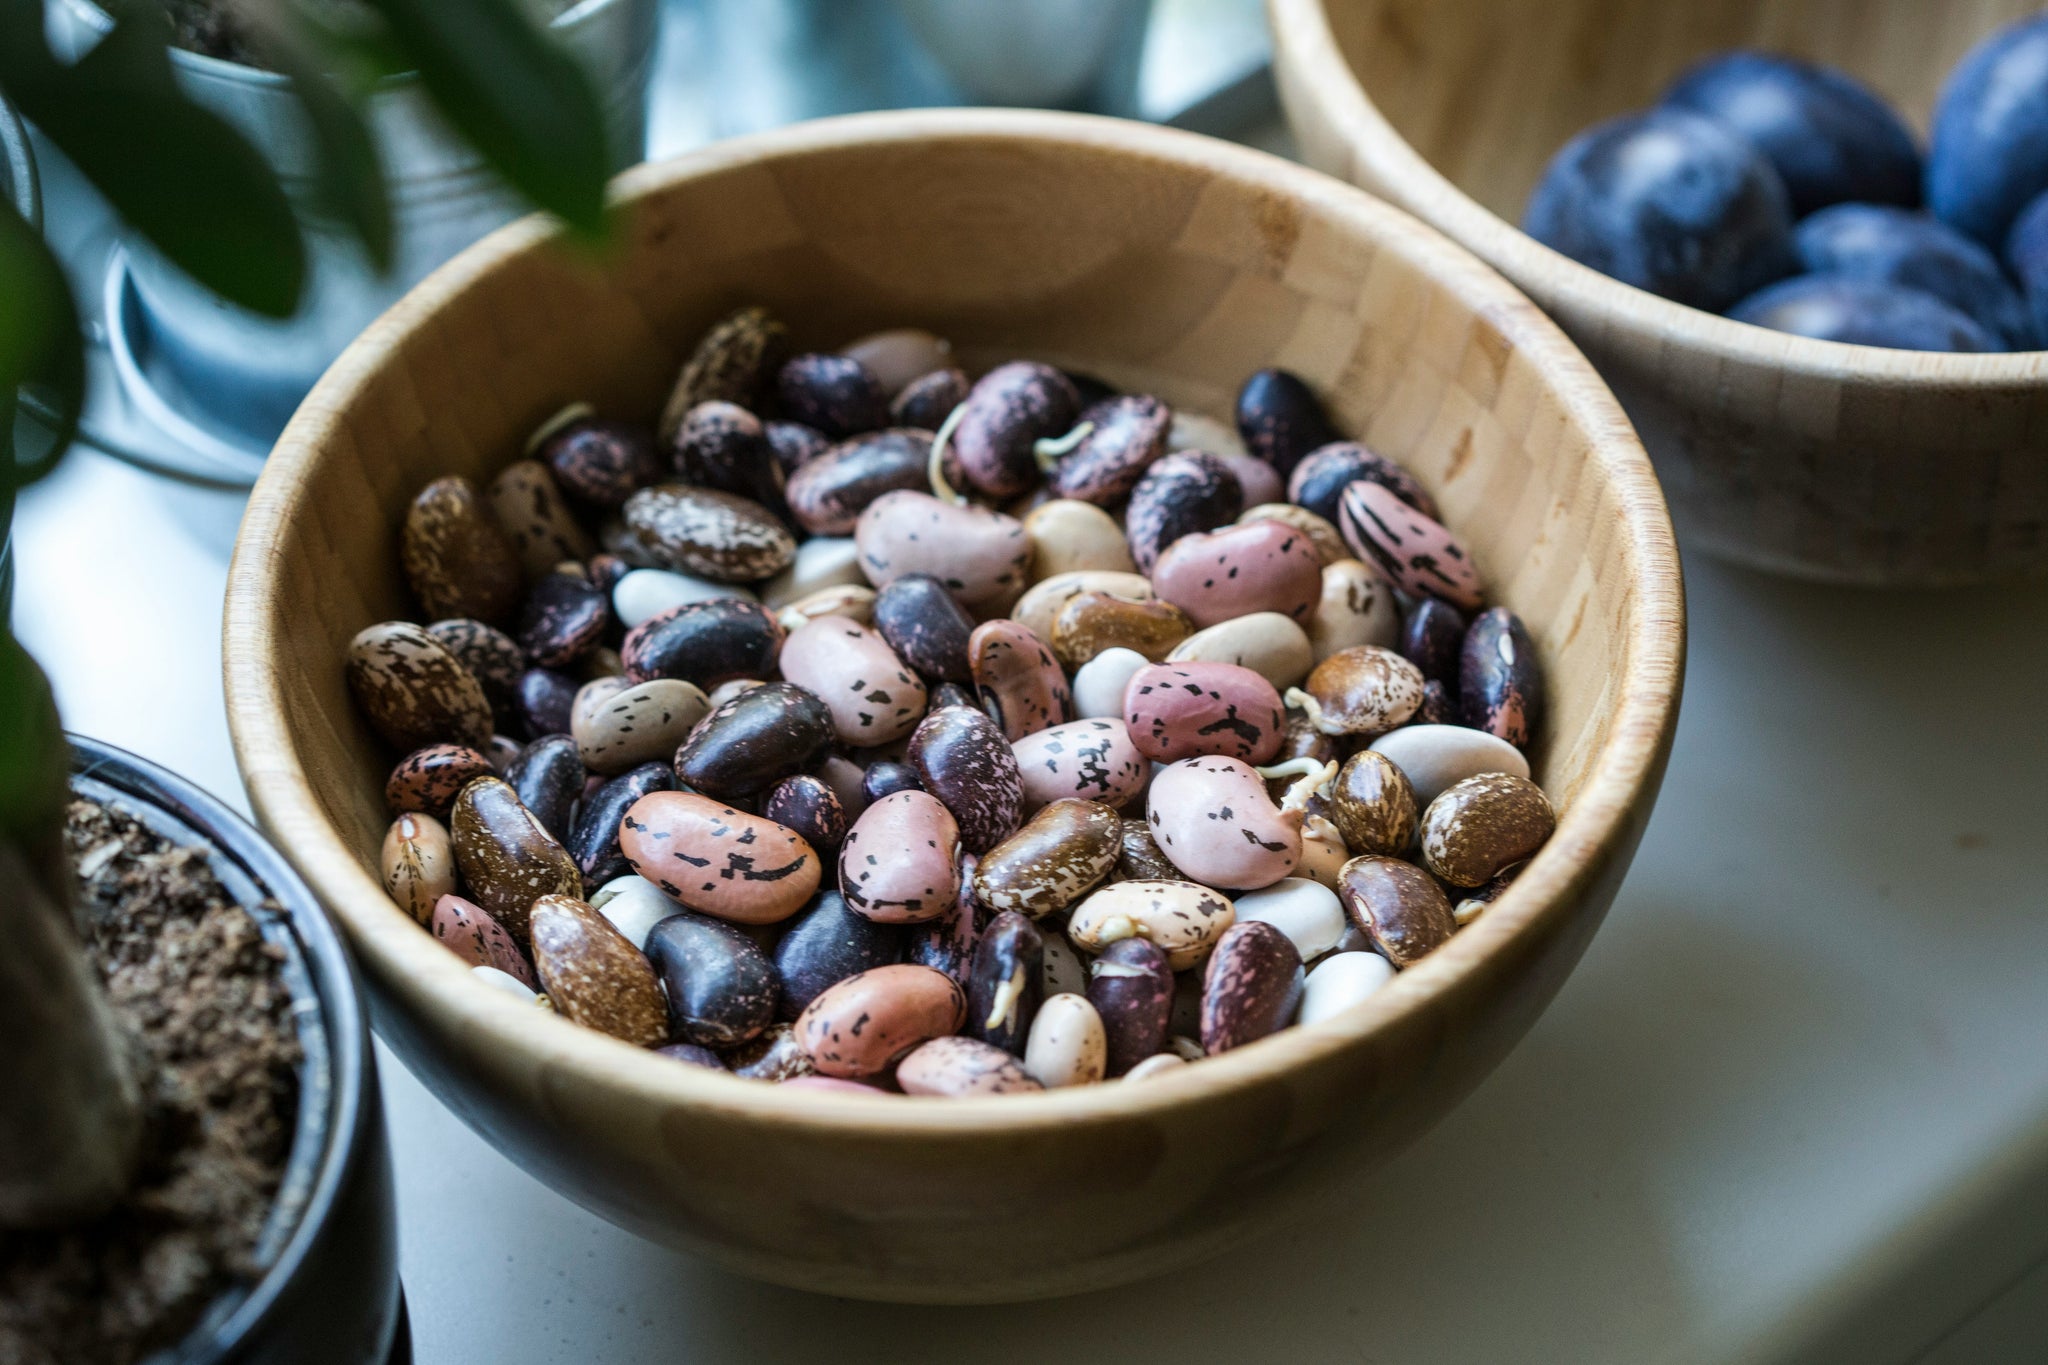 A variety of beans displayed in a bowl